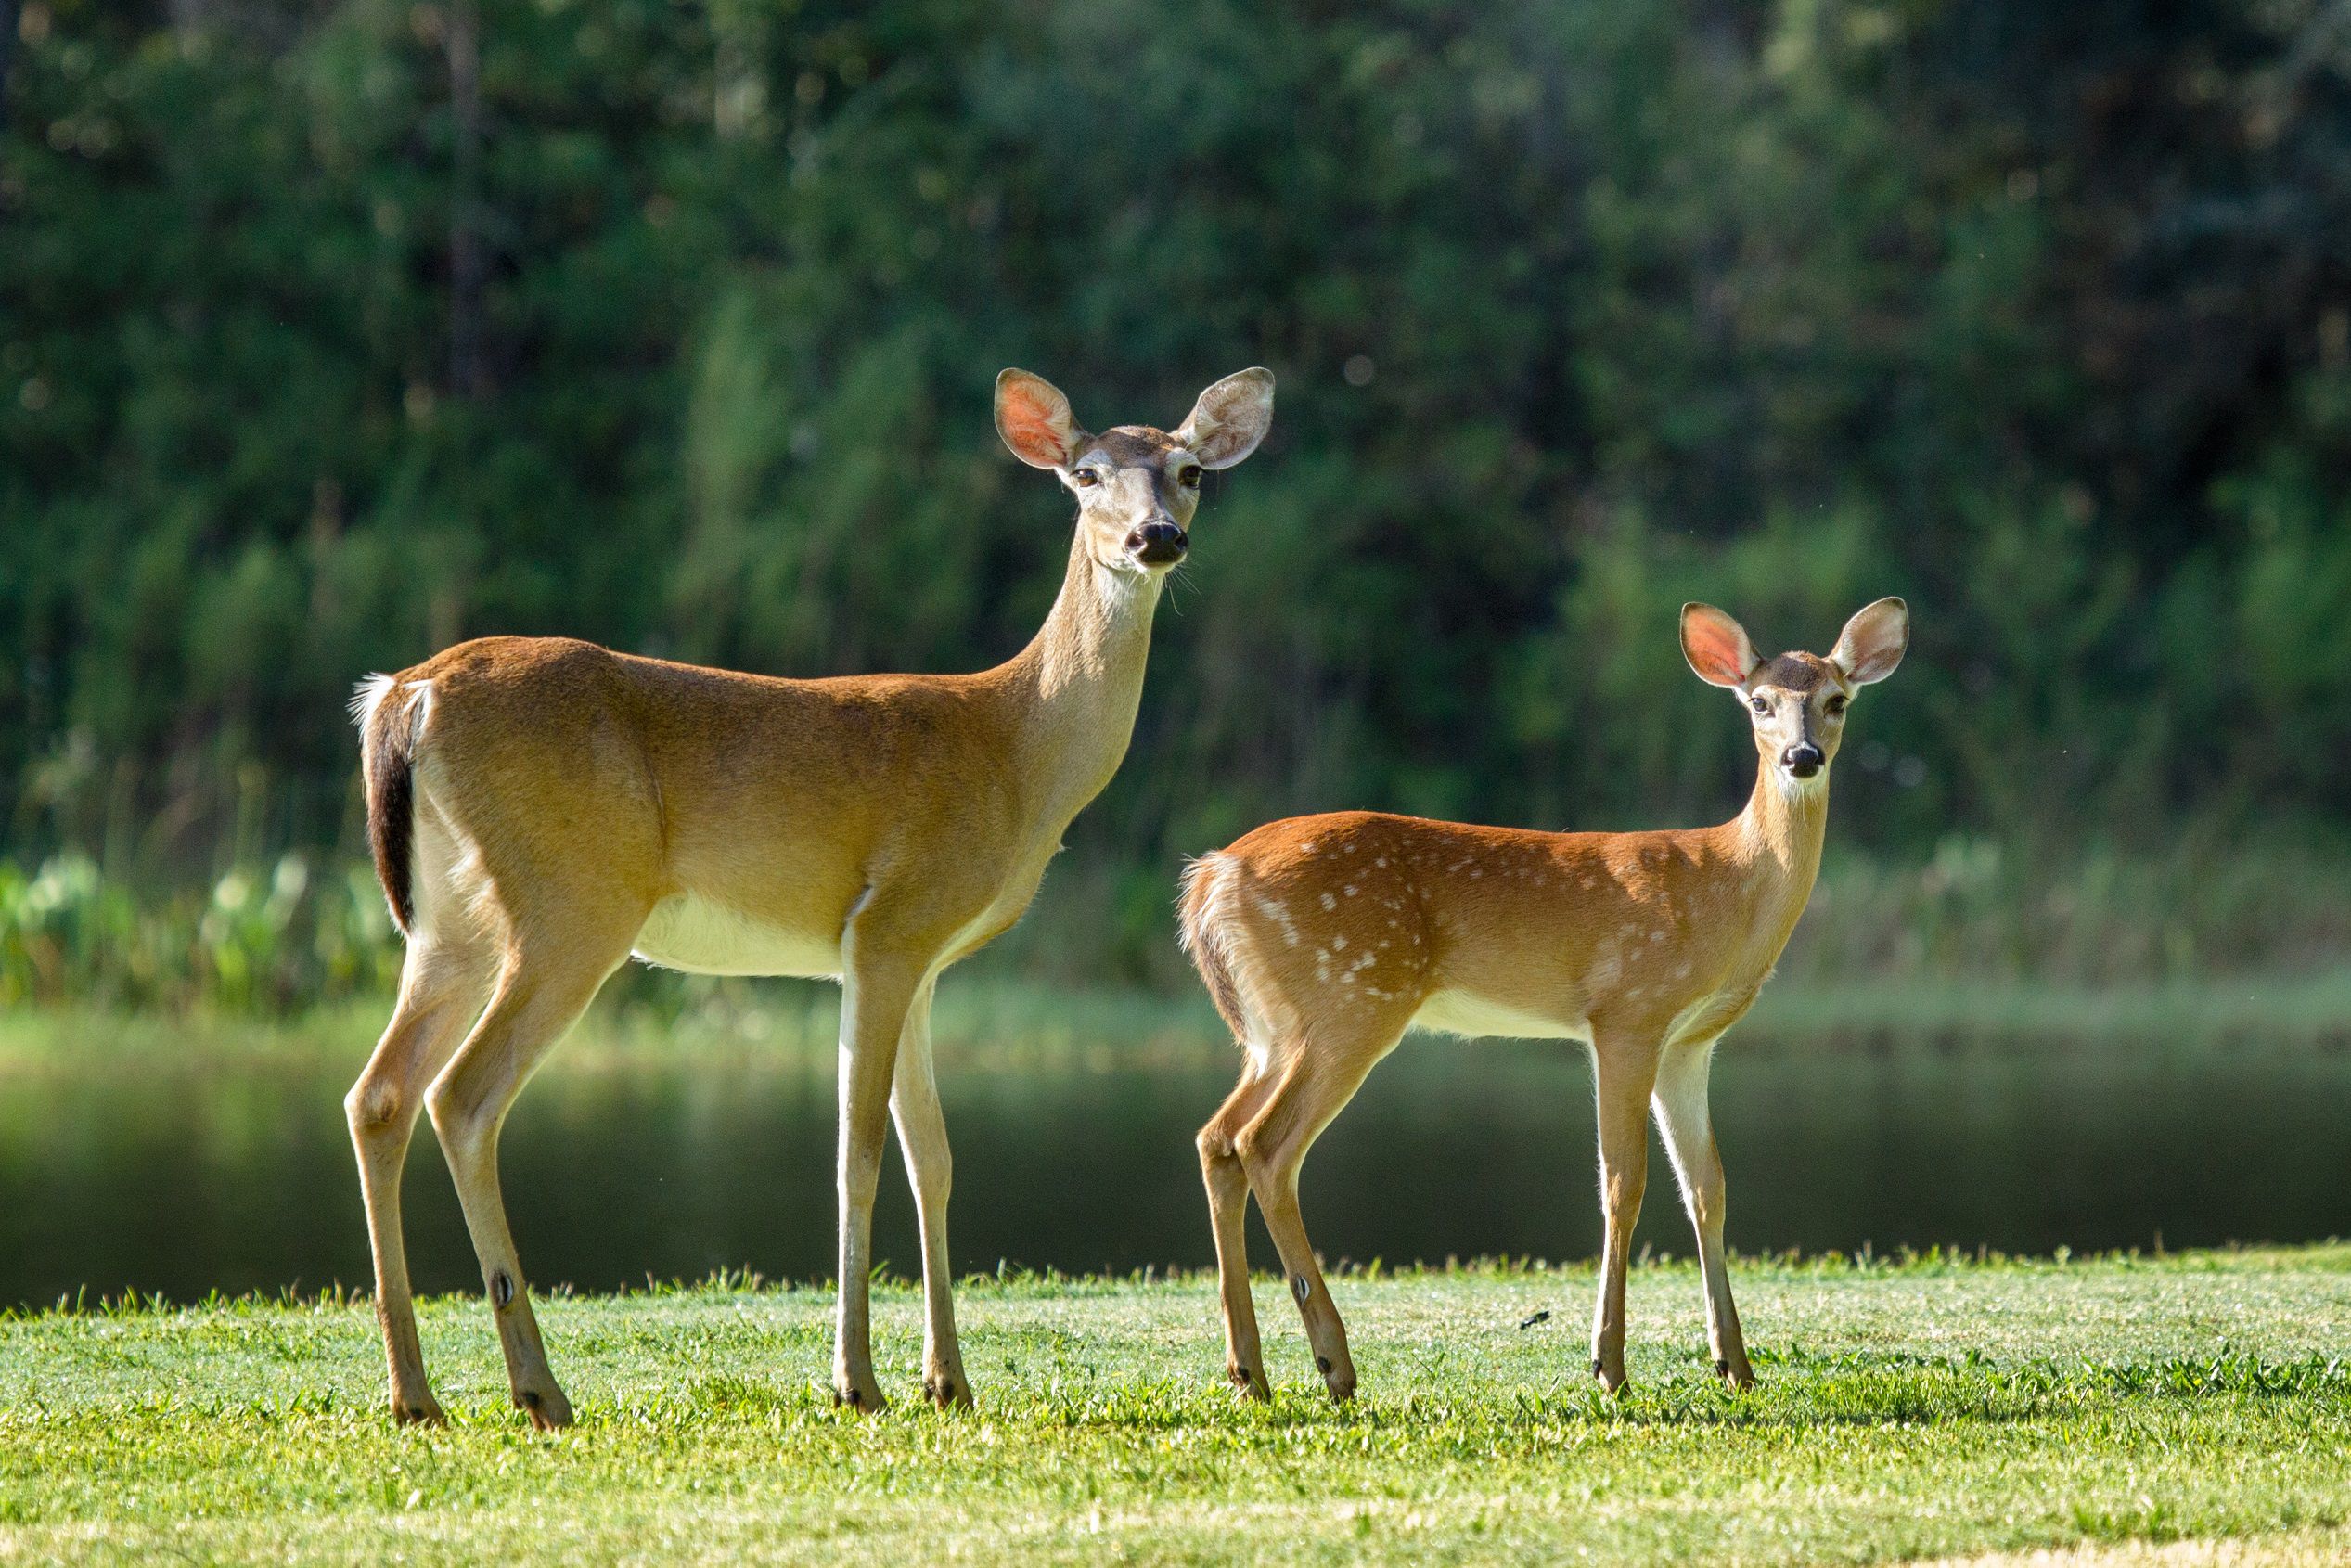 Scientists worry that 'zombie deer disease' could infect humans